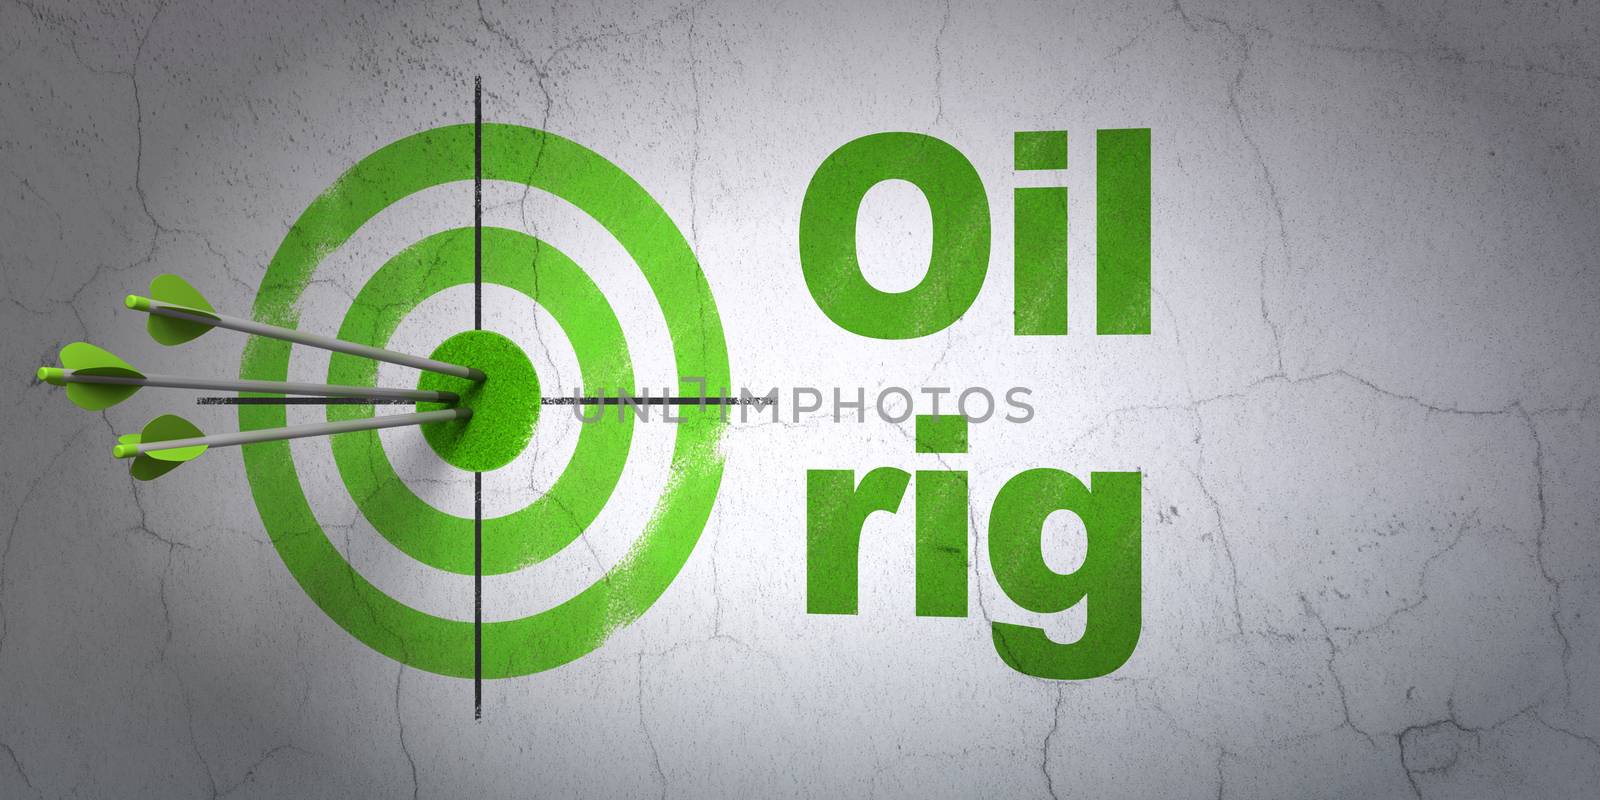 Success Industry concept: arrows hitting the center of target, Green Oil Rig on wall background, 3D rendering